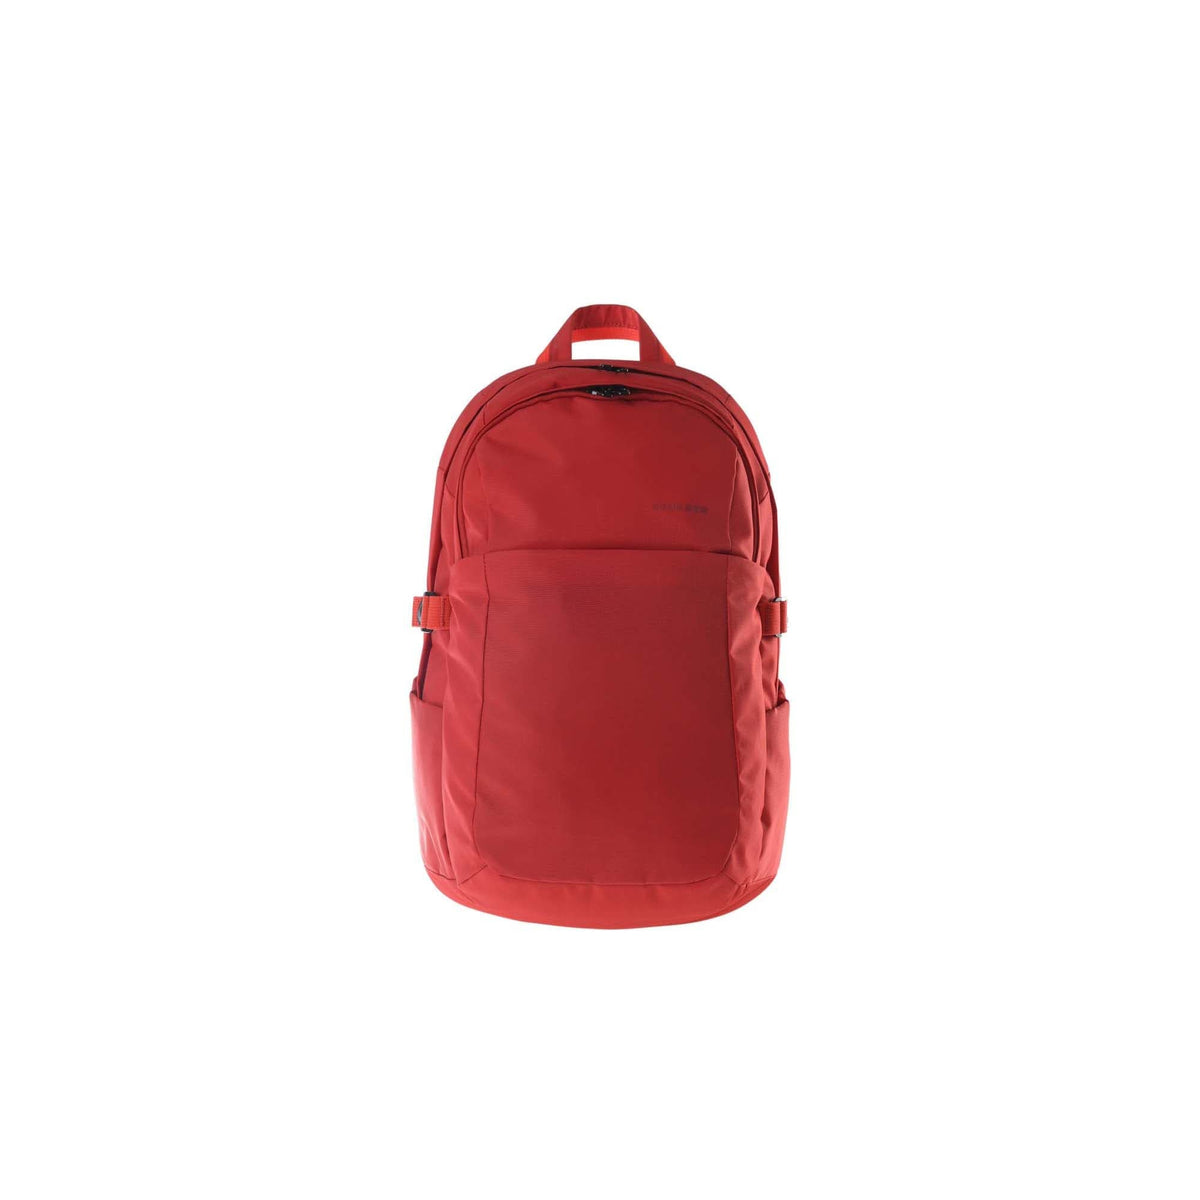 Tucano Bravo Backpack for 15.6" Macbook and Laptop